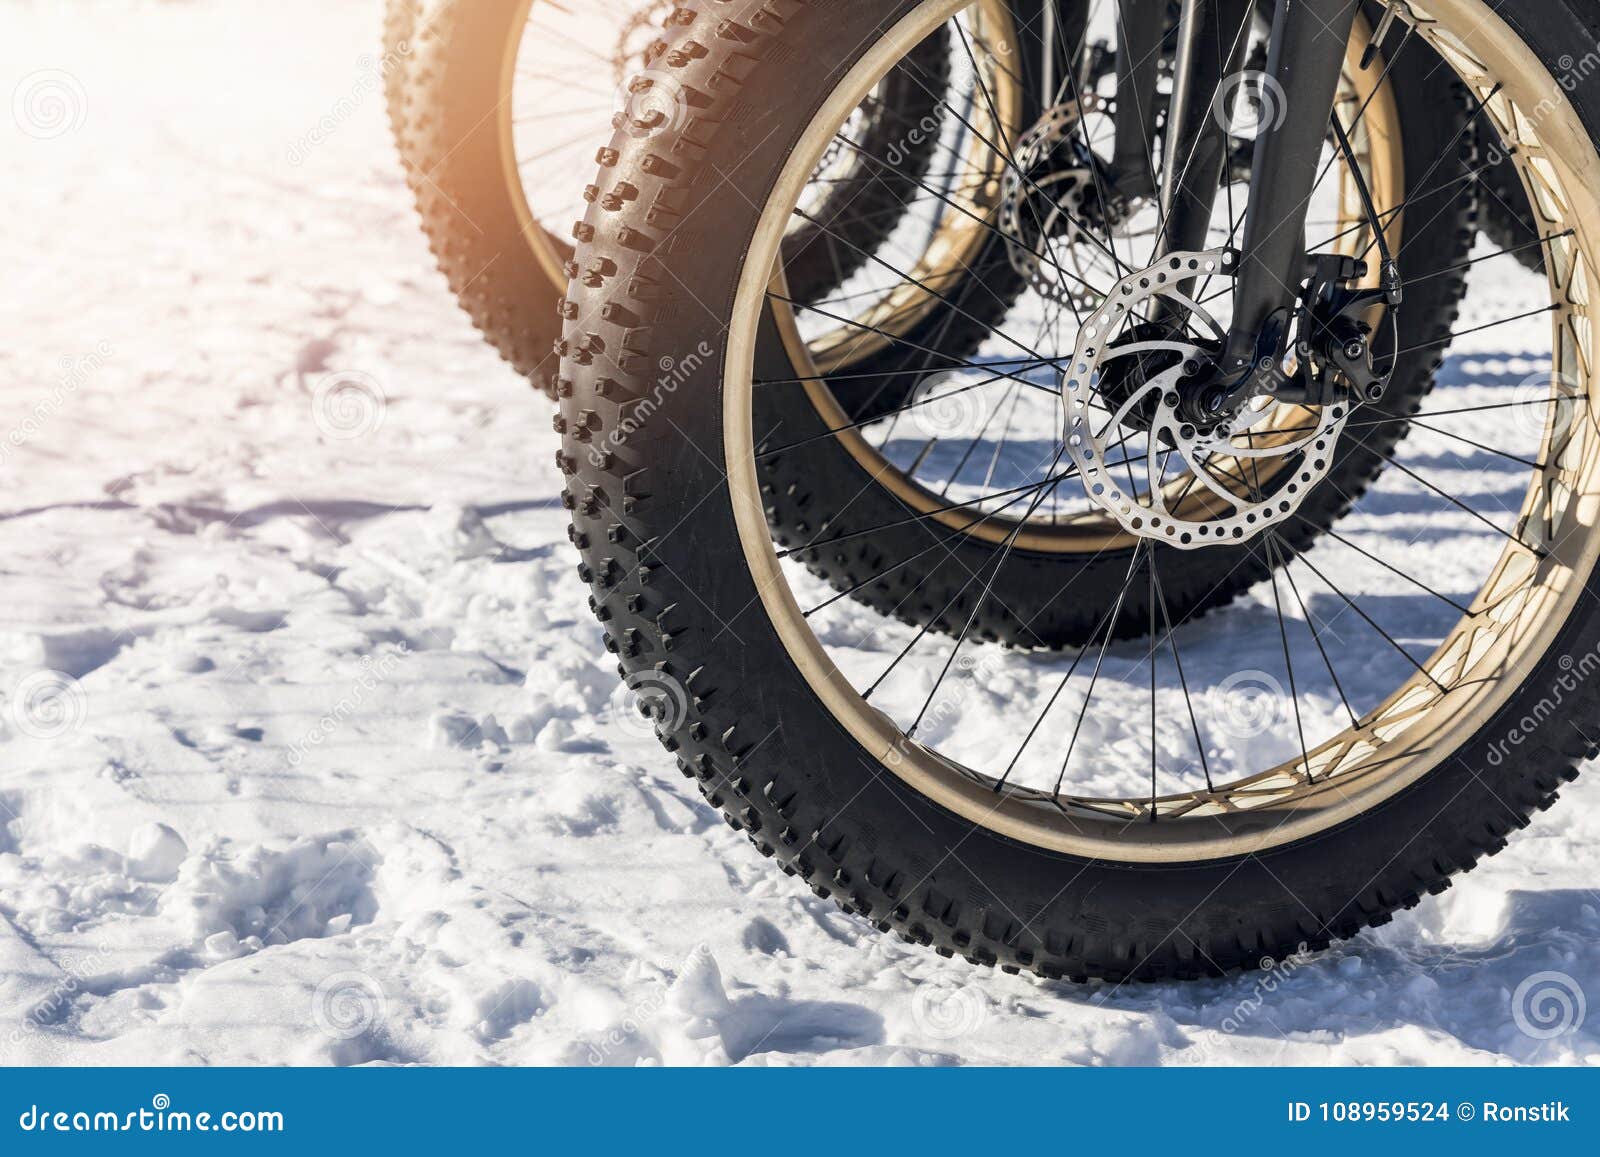 fatbike tires in the snow